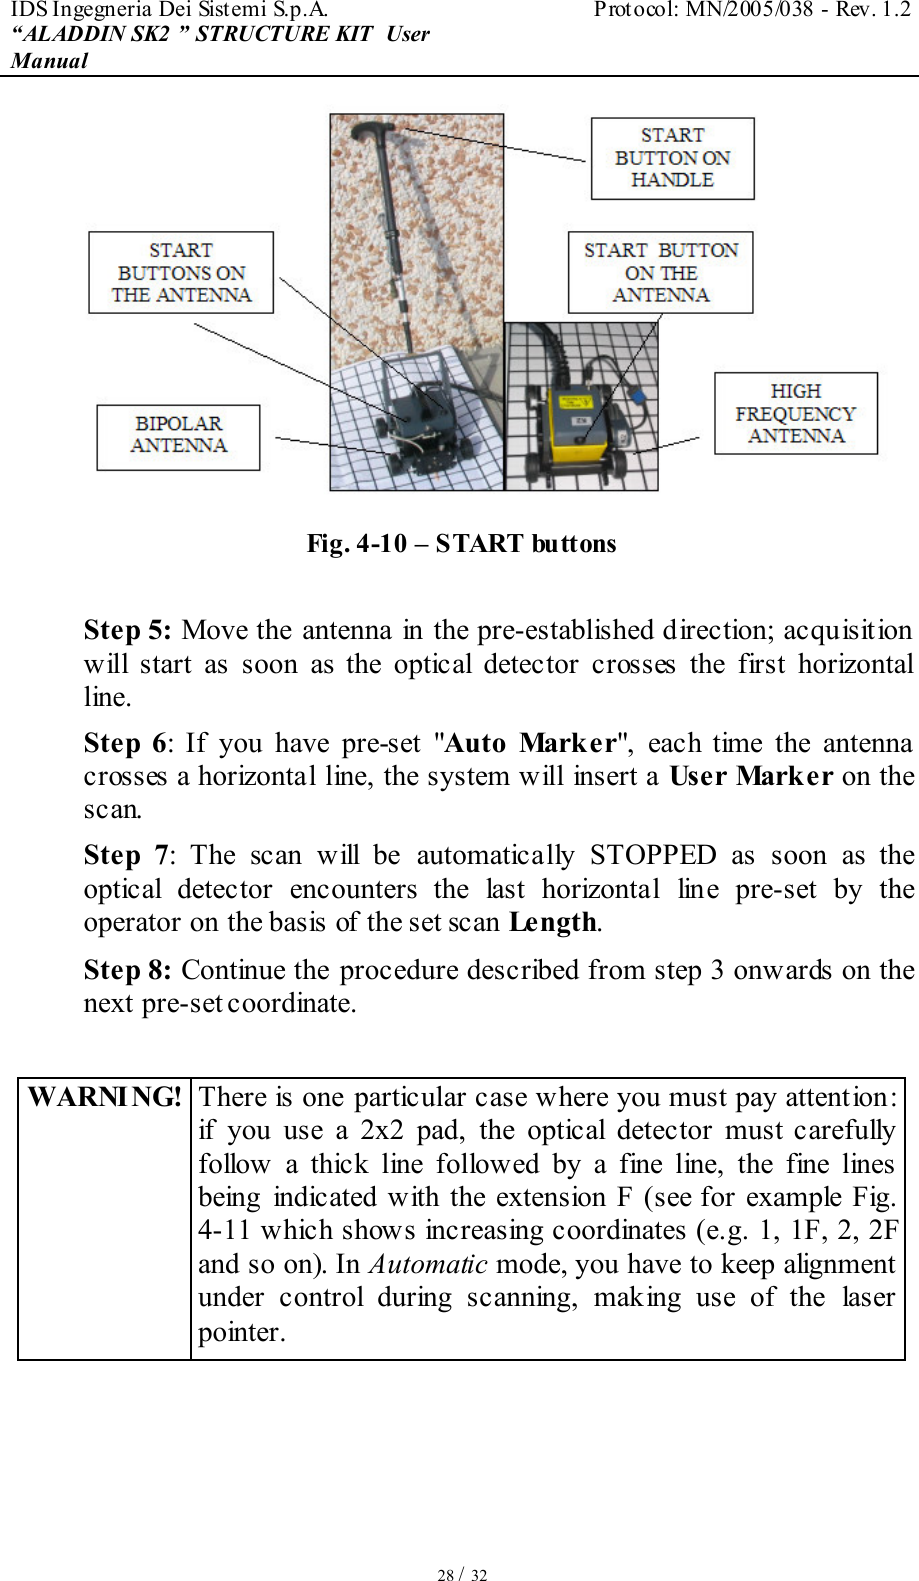 IDS Ingegneria Dei Sistemi S.p.A.  Protocol: MN/2005/038 - Rev. 1.2 “ALADDIN SK2 ” STRUCTURE KIT  User Manual   28 / 32  Fig. 4-10 – START buttons  Step 5: Move the antenna  in the pre-established direction; acquisition will  start  as  soon  as  the  optical  detector  crosses  the  first  horizontal line.  Step  6:  If  you  have  pre-set  &quot;Auto  Marker&quot;,  each  time  the  antenna crosses a horizontal  line, the system will insert a User Marker on the scan.  Step  7:  The  scan  will  be  automatically  STOPPED  as  soon  as  the optical  detector  encounters  the  last  horizontal  line  pre-set  by  the operator on the basis of the set scan Length.  Step 8: Continue the procedure described from step 3 onwards on the next pre-set coordinate.  WARNI NG! There is one particular case where you must pay attention: if  you  use  a  2x2  pad,  the  optical  detector  must  carefully follow  a  thick  line  followed  by  a  fine  line,  the  fine  lines  being  indicated  with  the extension  F (see for example Fig. 4-11 which shows increasing coordinates (e.g. 1, 1F, 2, 2F and so on). In Automatic mode, you have to keep alignment under  control  during  scanning,  making  use  of  the  laser pointer. 